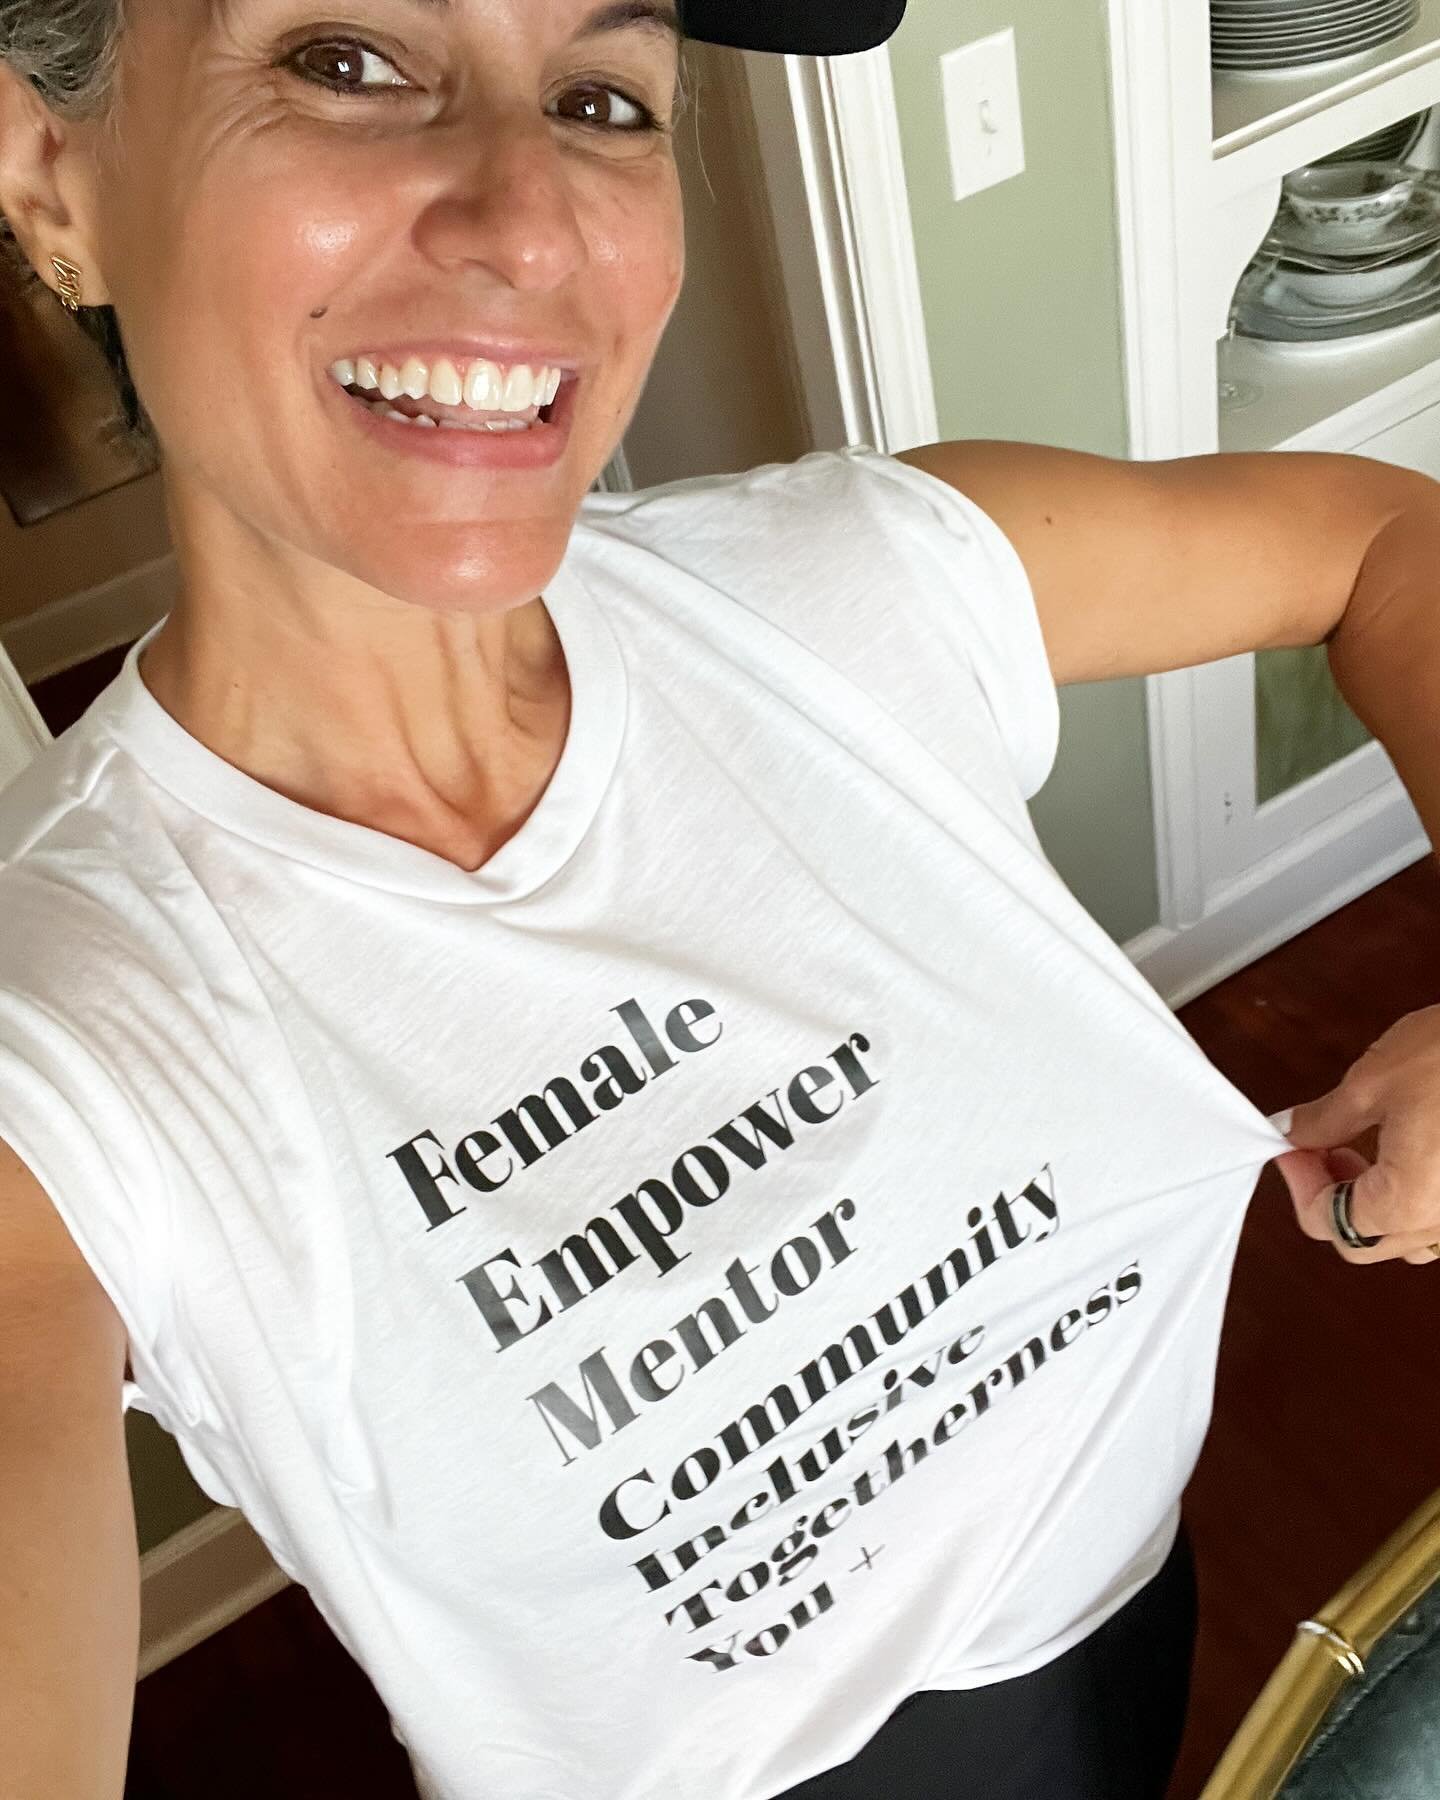 We have new FemCity swag!! We are loving this new shirt. It&rsquo;s got the FemCity vibe. ❤️ see what else we have at FemCity.com/swag.